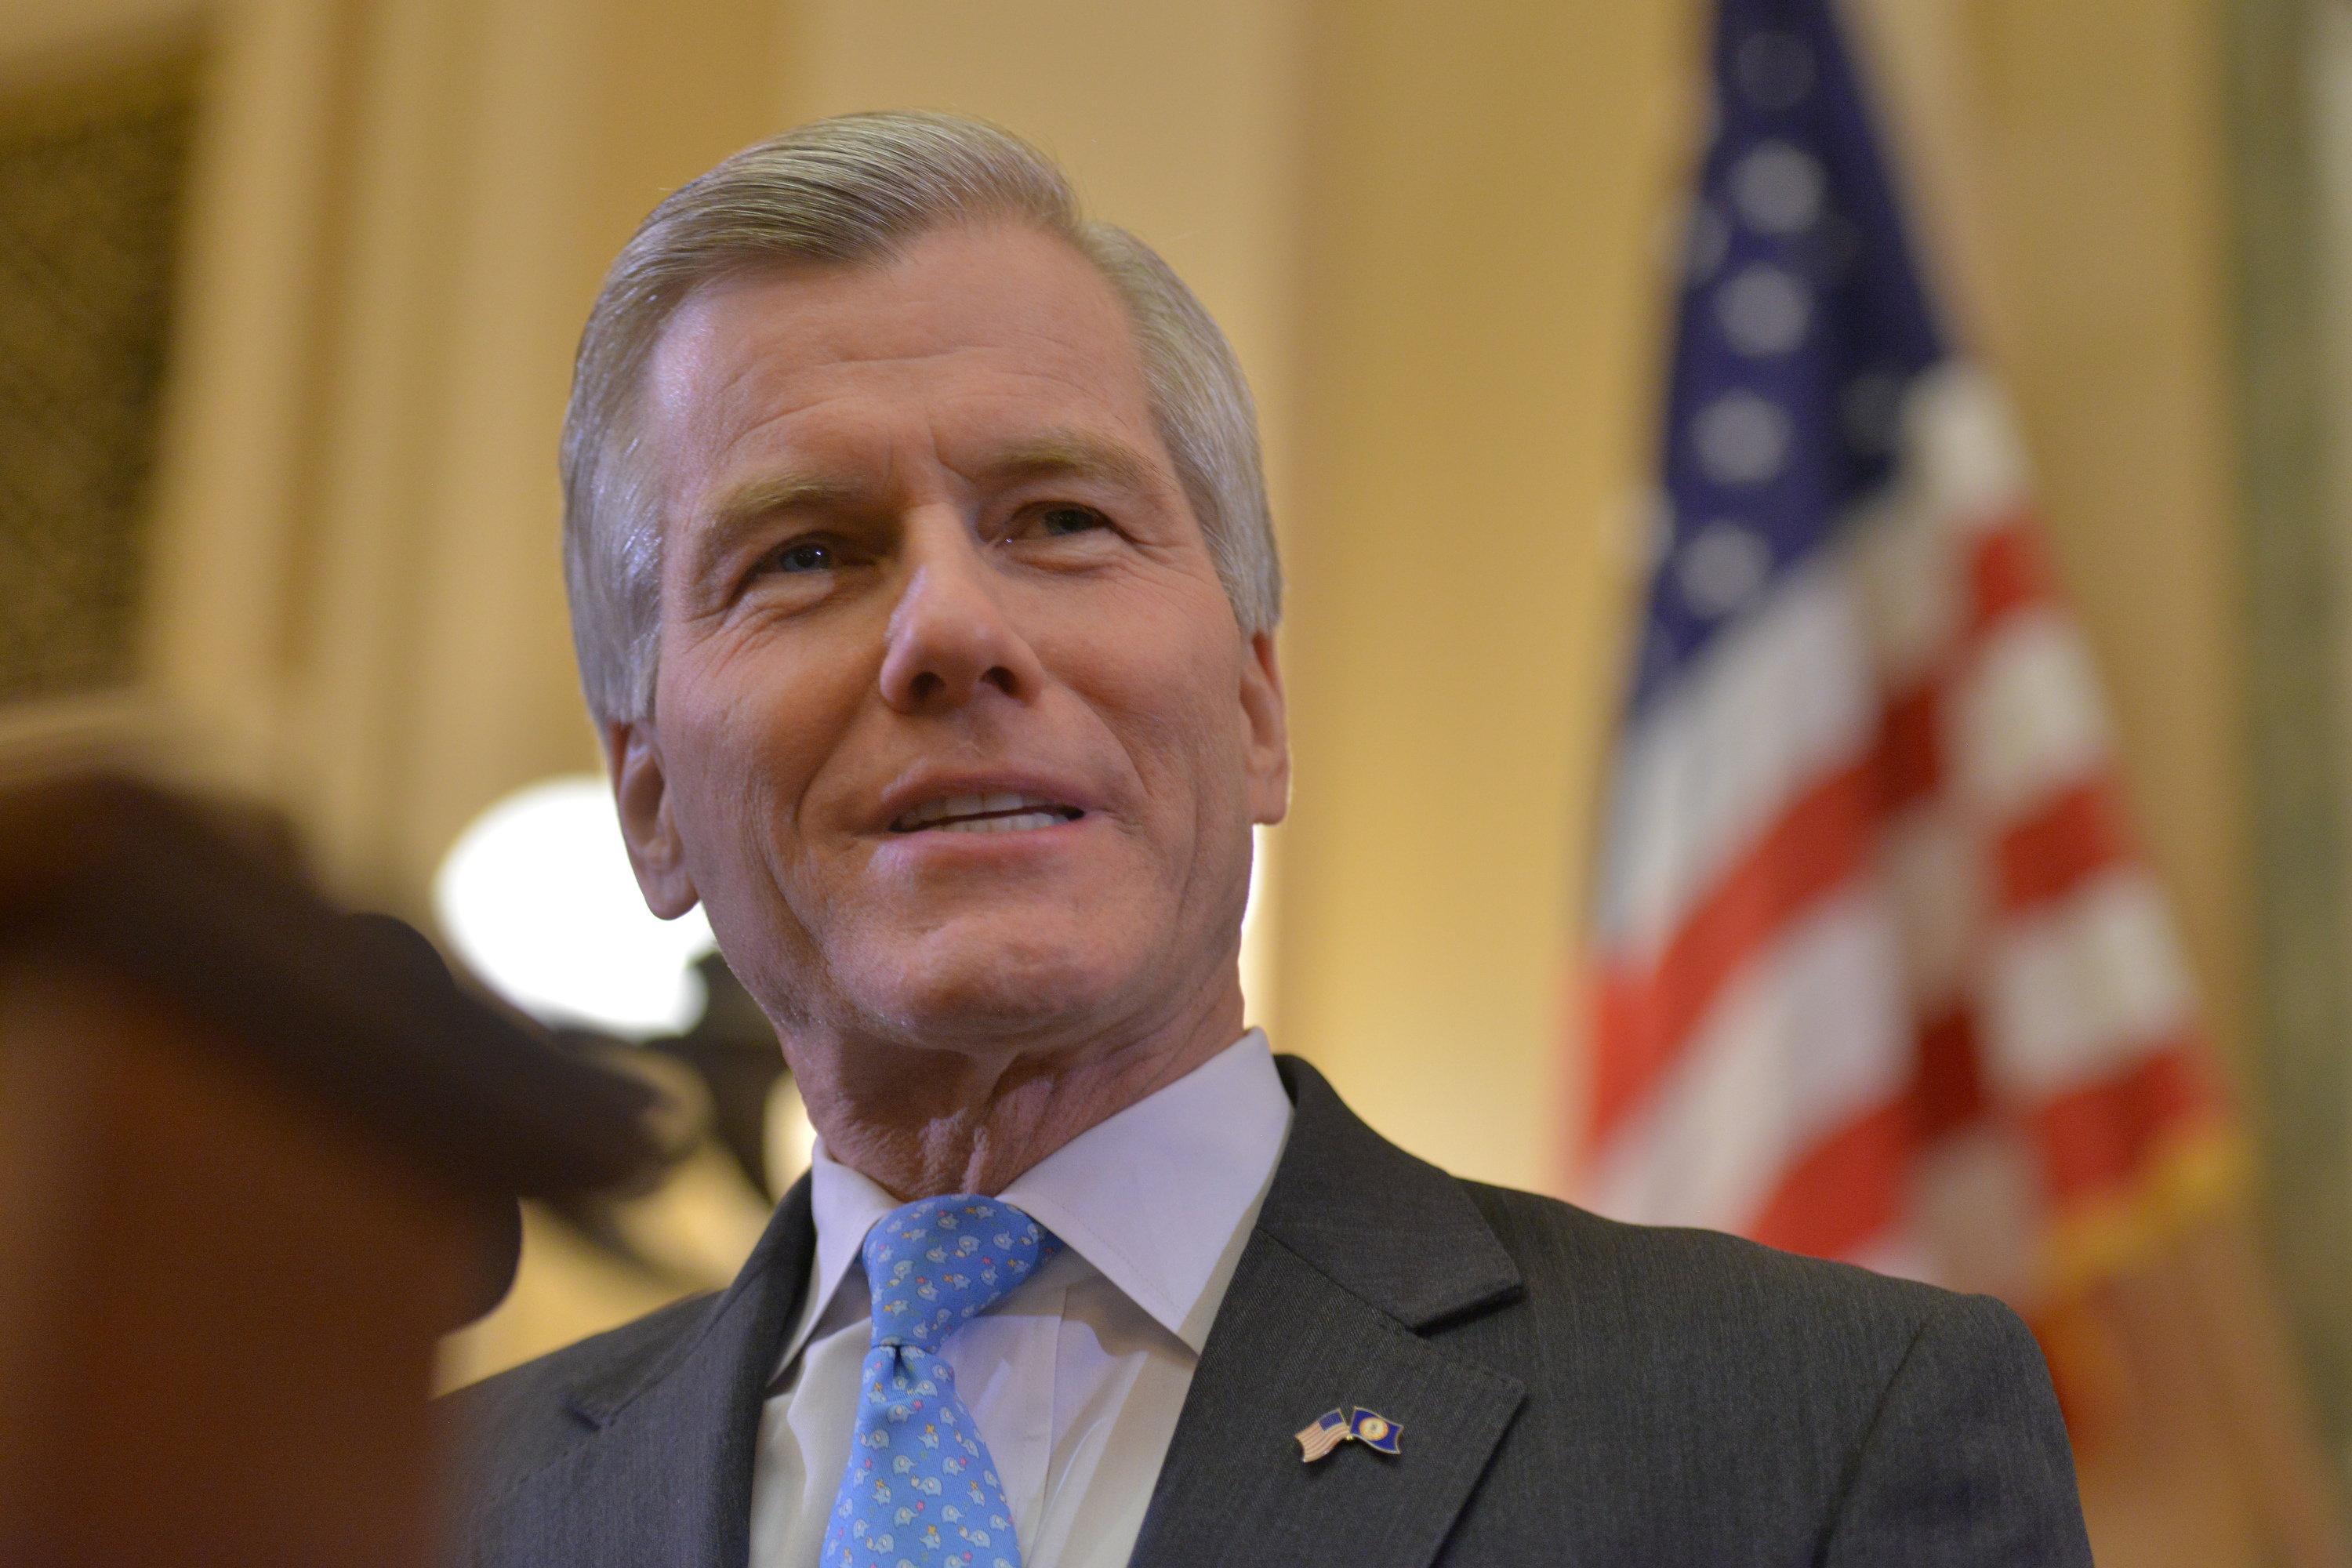 Outgoing Virginia governor Bob McDonnell delivers his final State of the Commonwealth address before newly elected Virginia governor Terry McAuliffe takes office at the Virginia State Capitol in Richmond, Va., on Jan. 8, 2014 (Jahi Chikwendiu / The Washington Post / Getty Images)